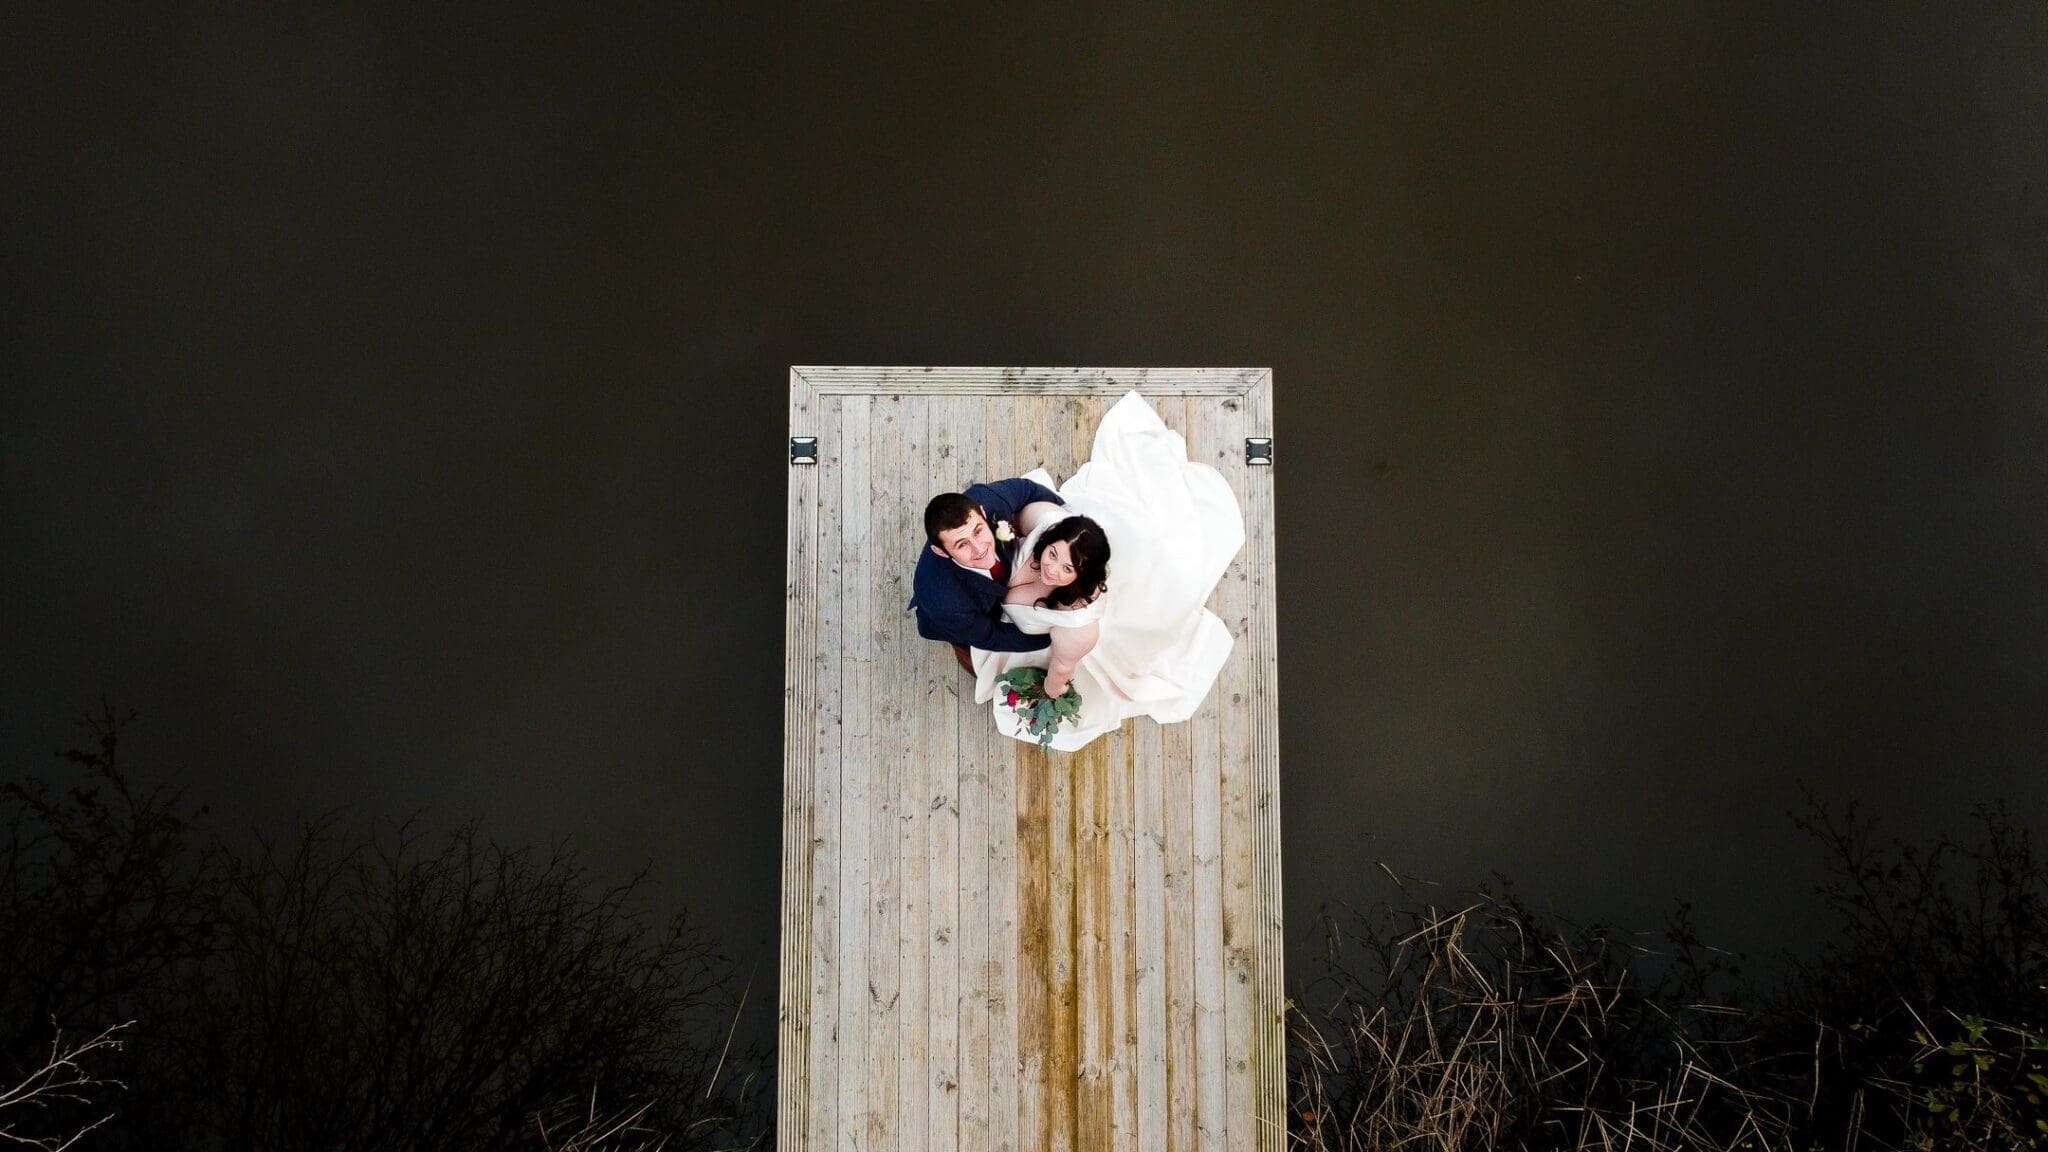 Bride & groom looking up on wooden jetty drone image 